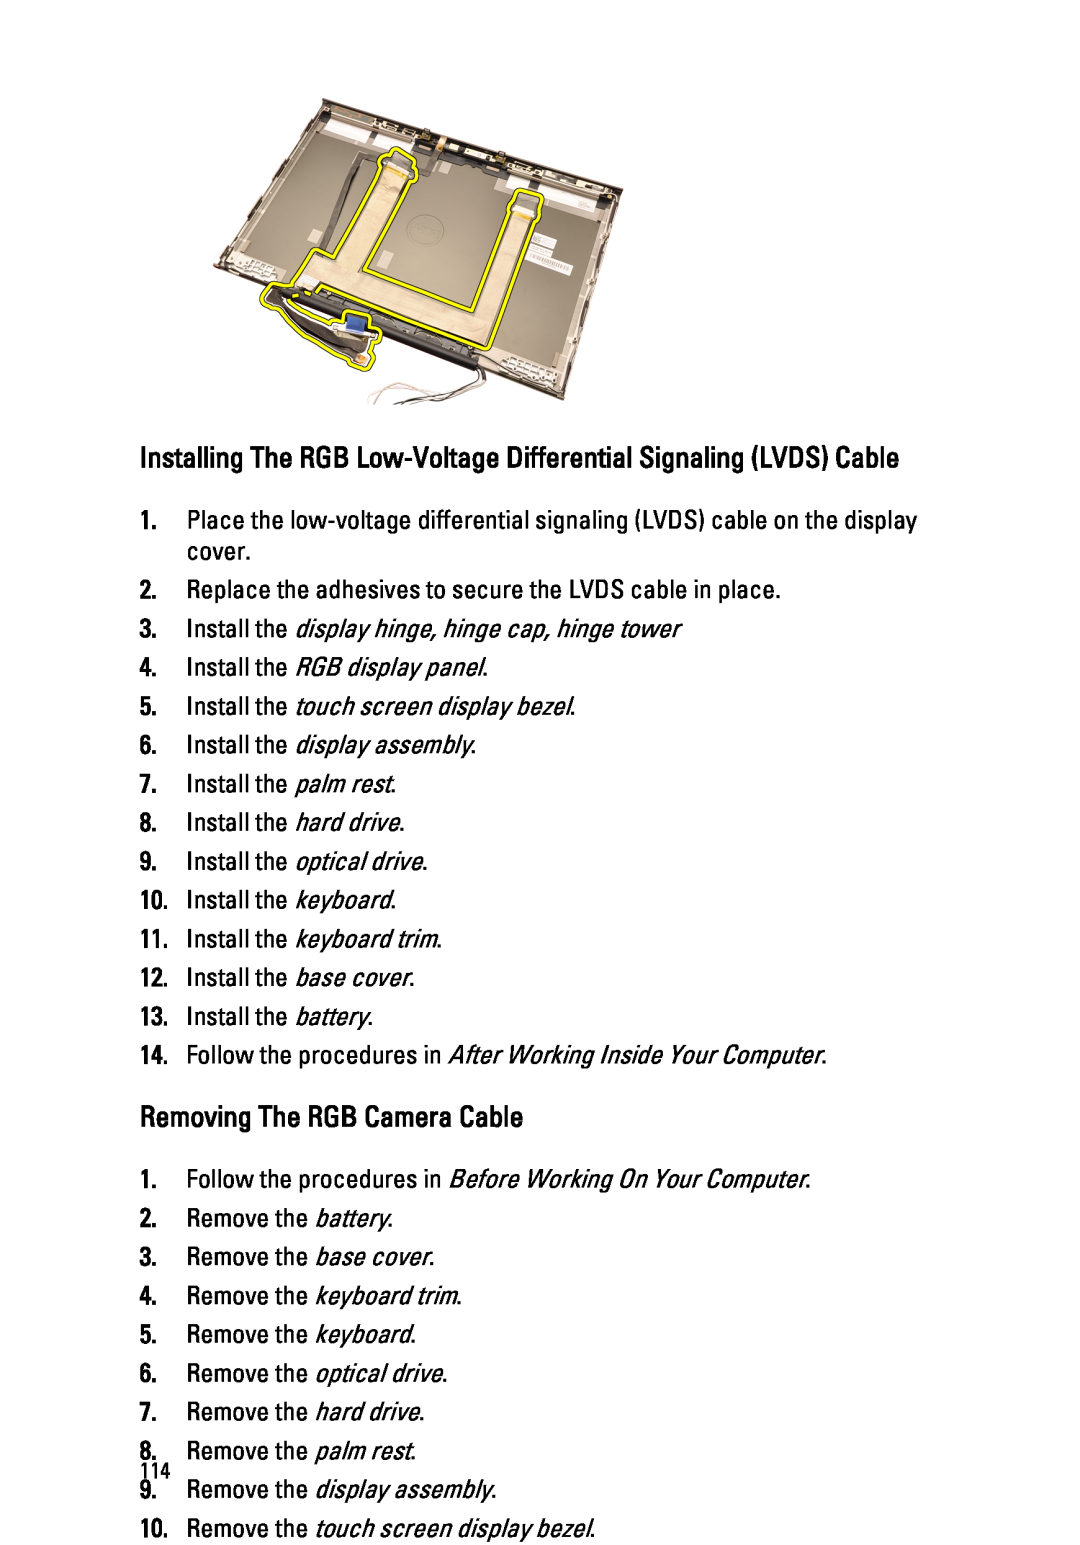 Dell M4600 owner manual Installing The RGB Low-Voltage Differential Signaling LVDS Cable, Removing The RGB Camera Cable 